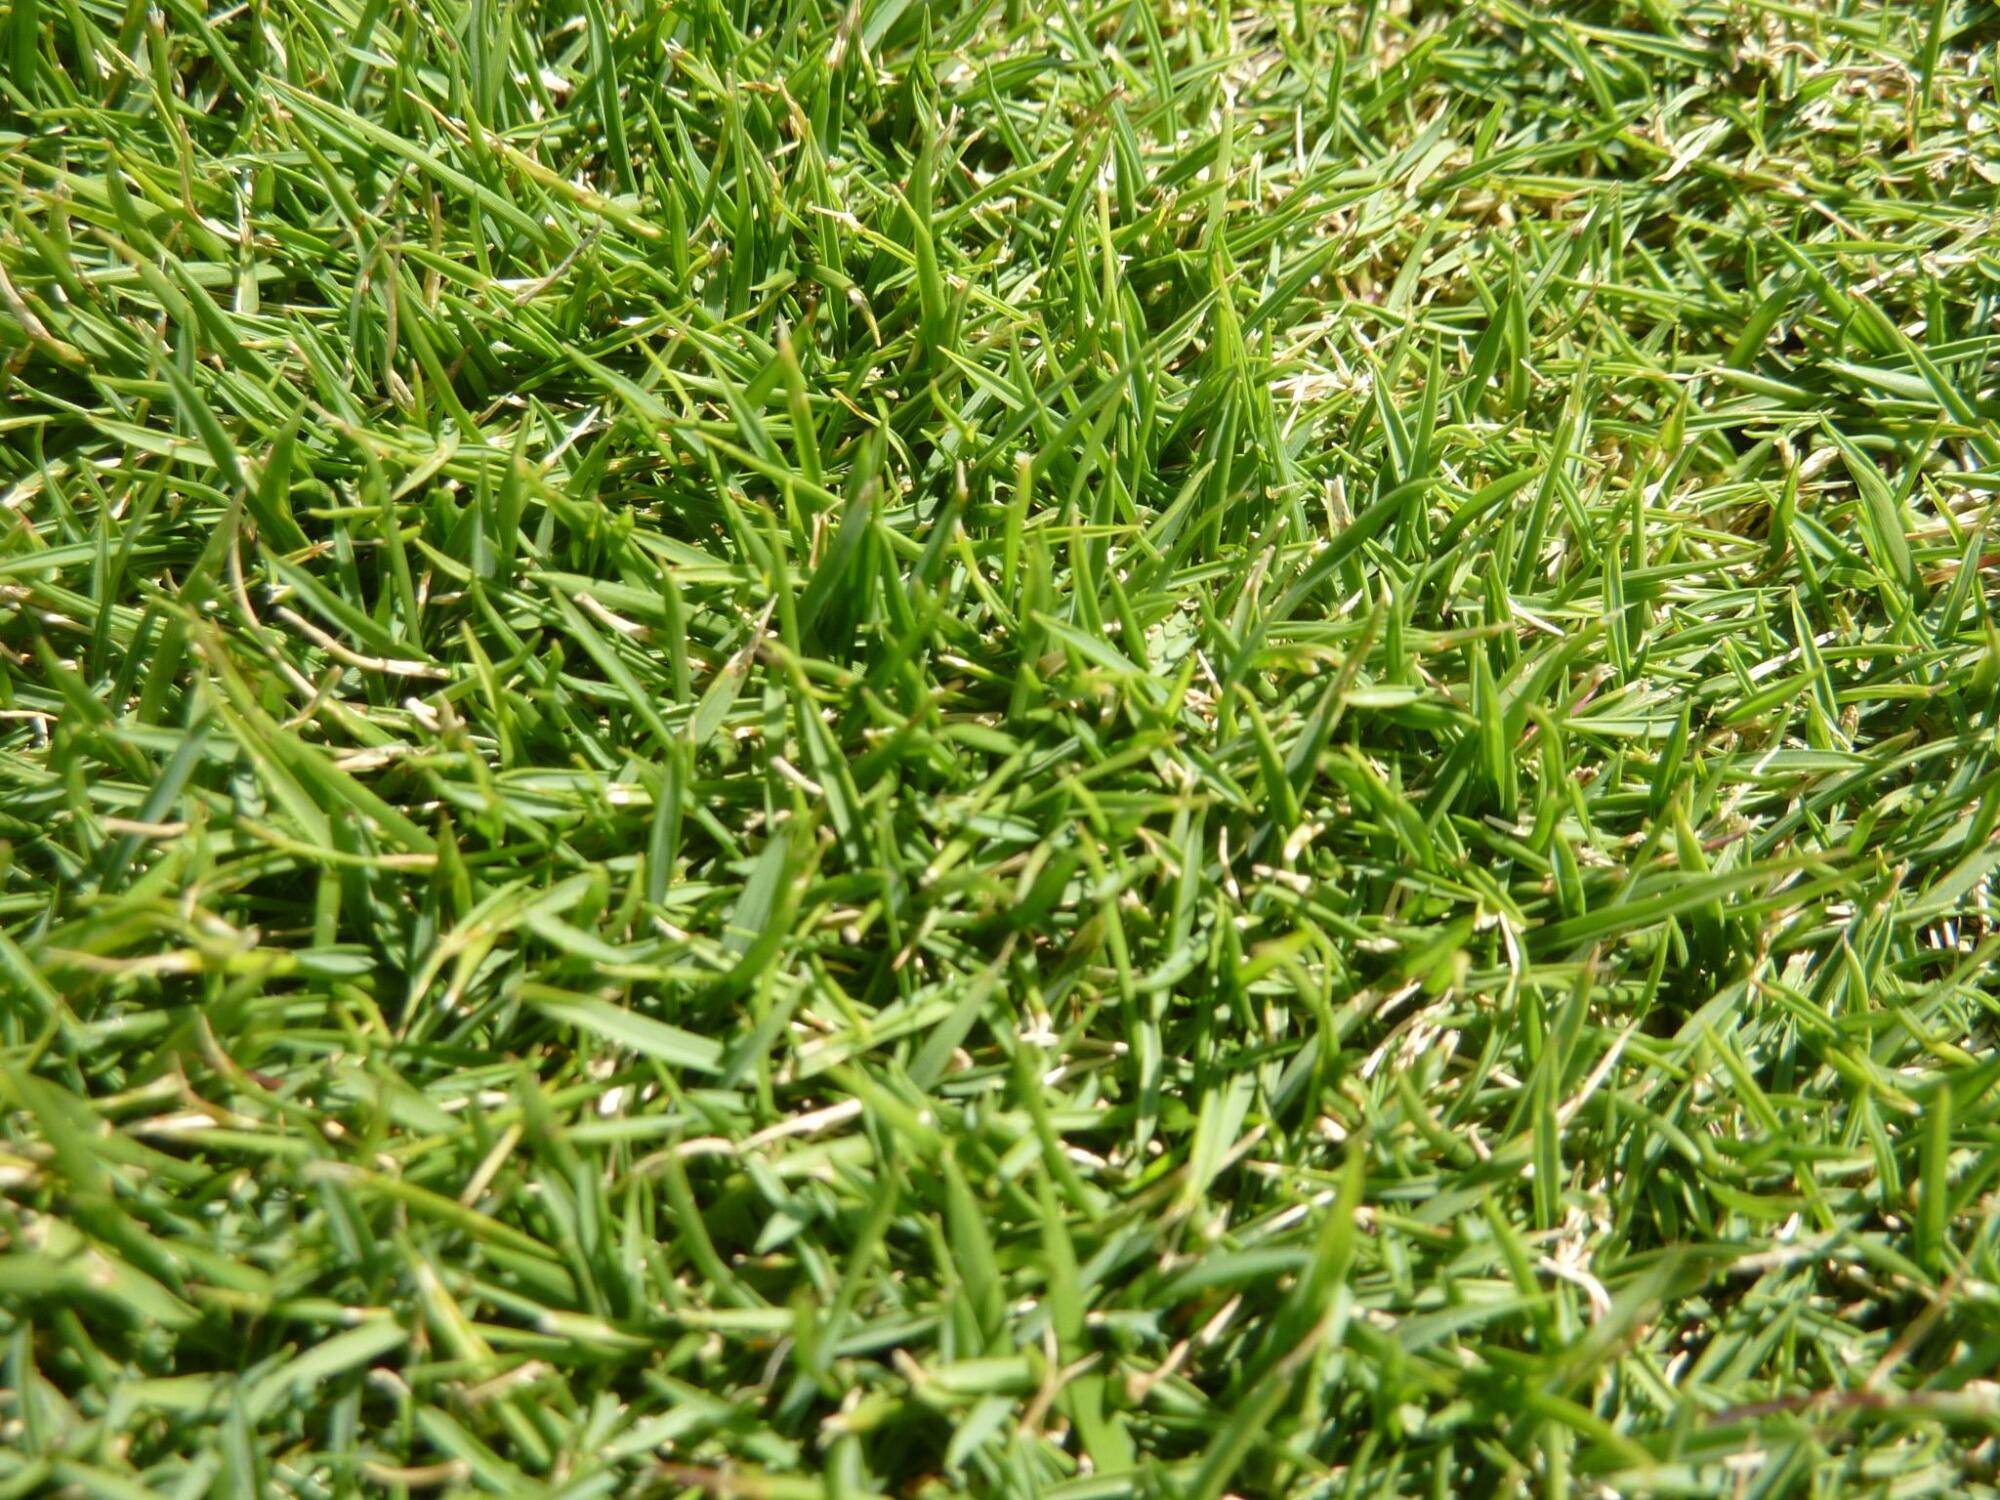 A close up of a green St. Augustine grass field.